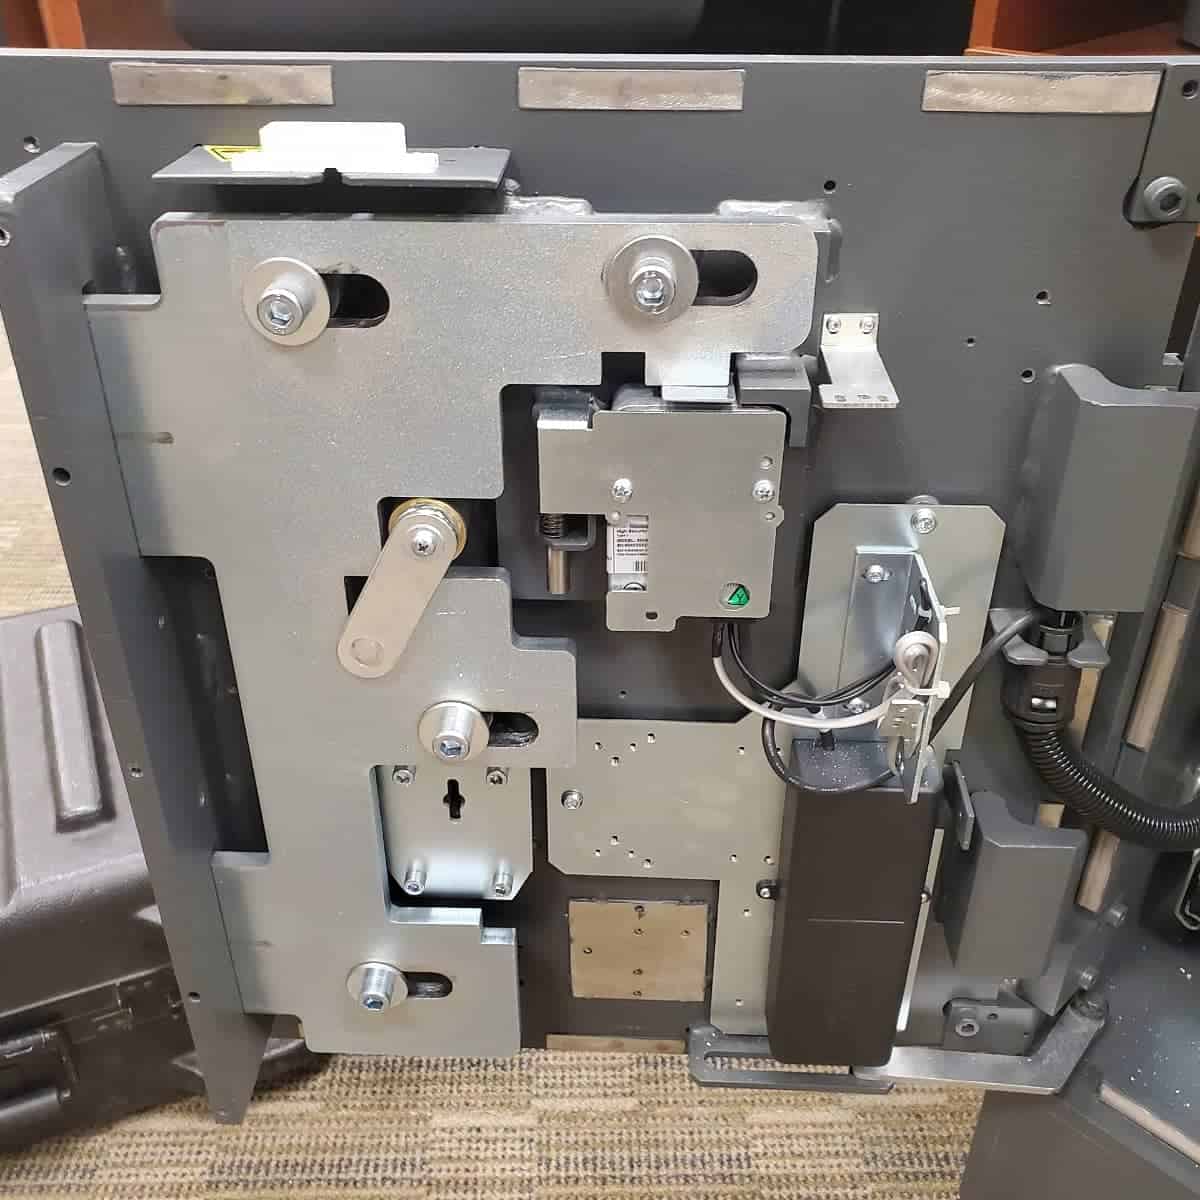 Drilling high security safe open